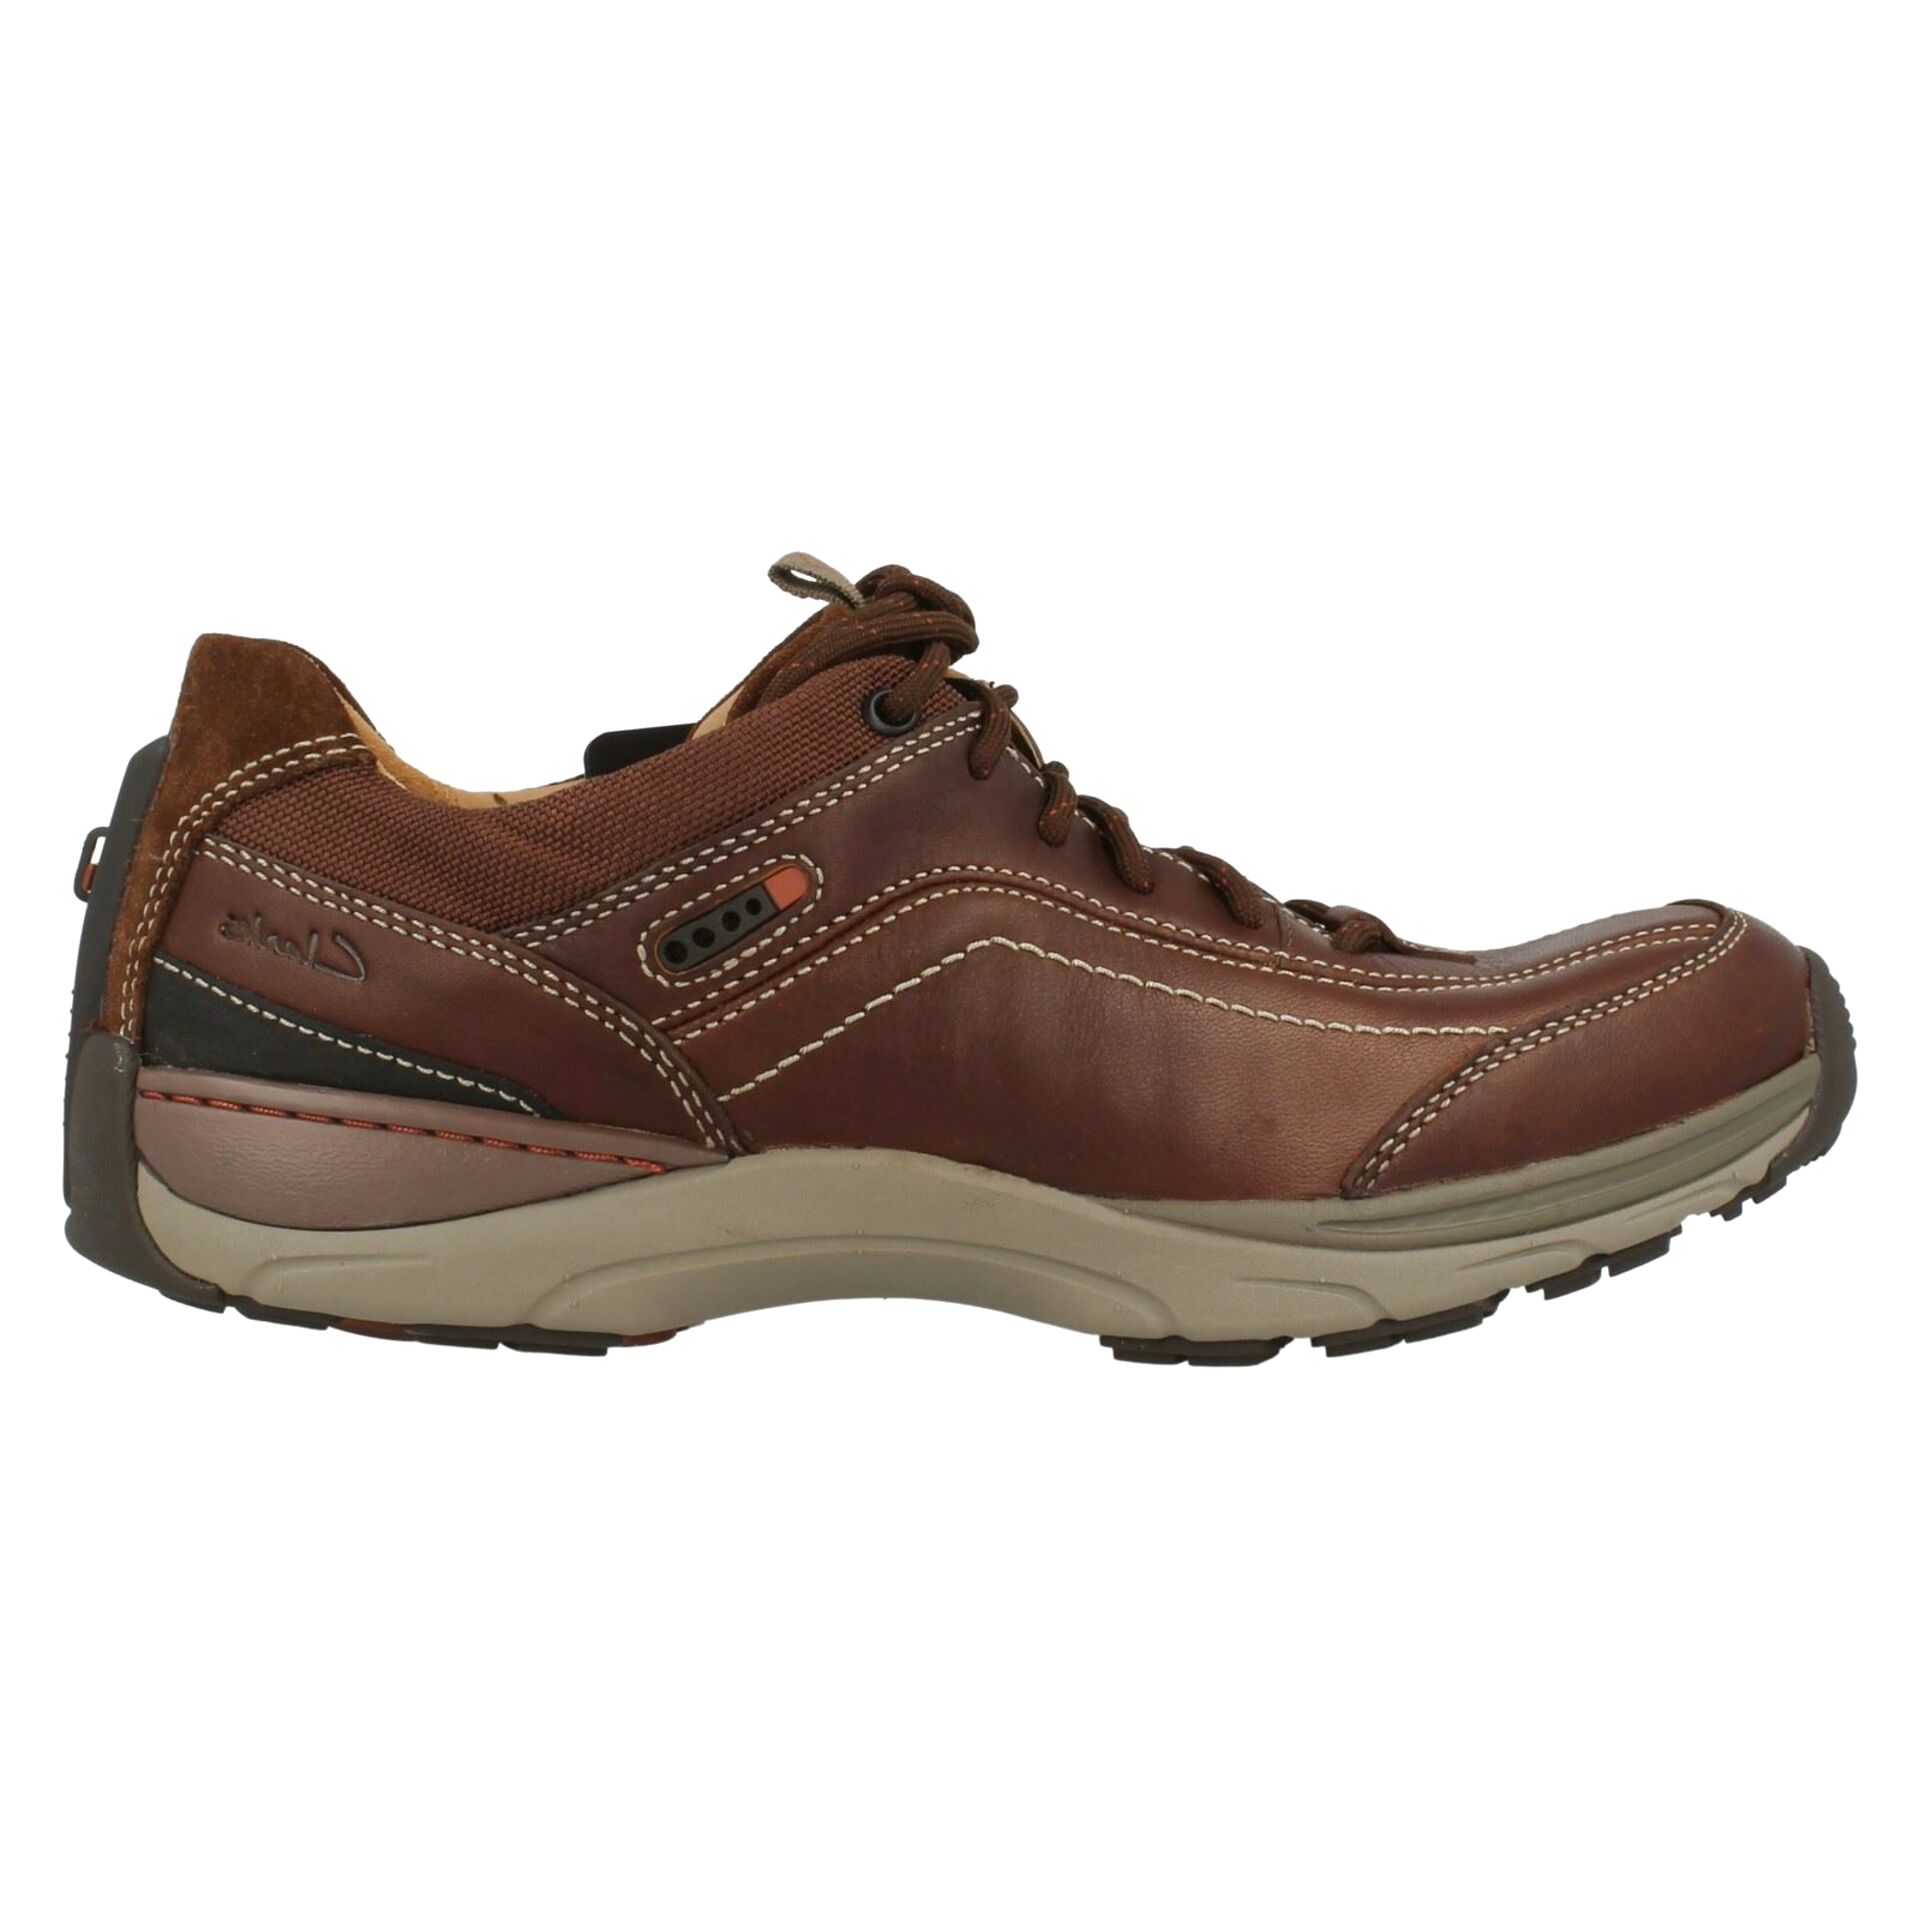 Mens Clarks Active Air for sale in UK | 67 used Mens Clarks Active Airs